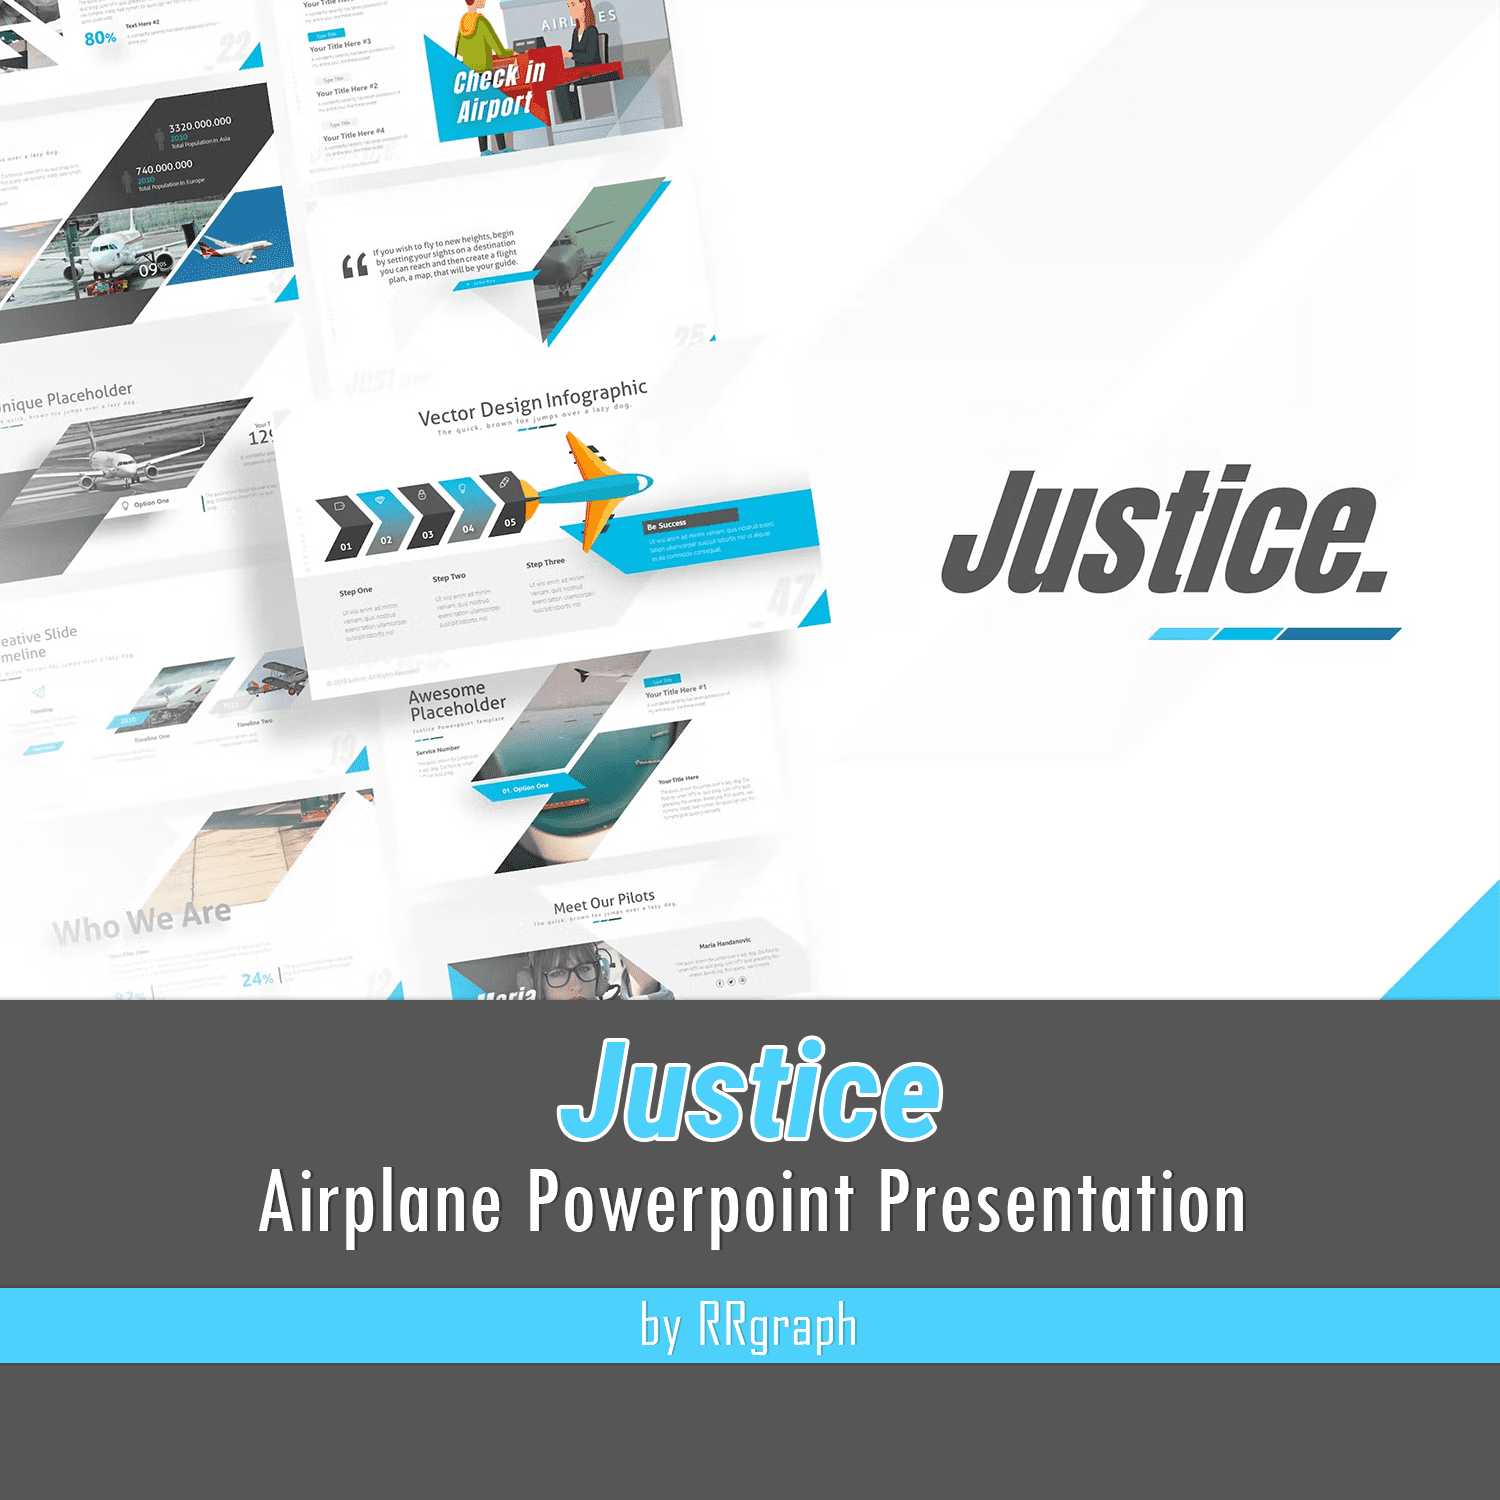 Prints of justice airplane powerpoint presentation.